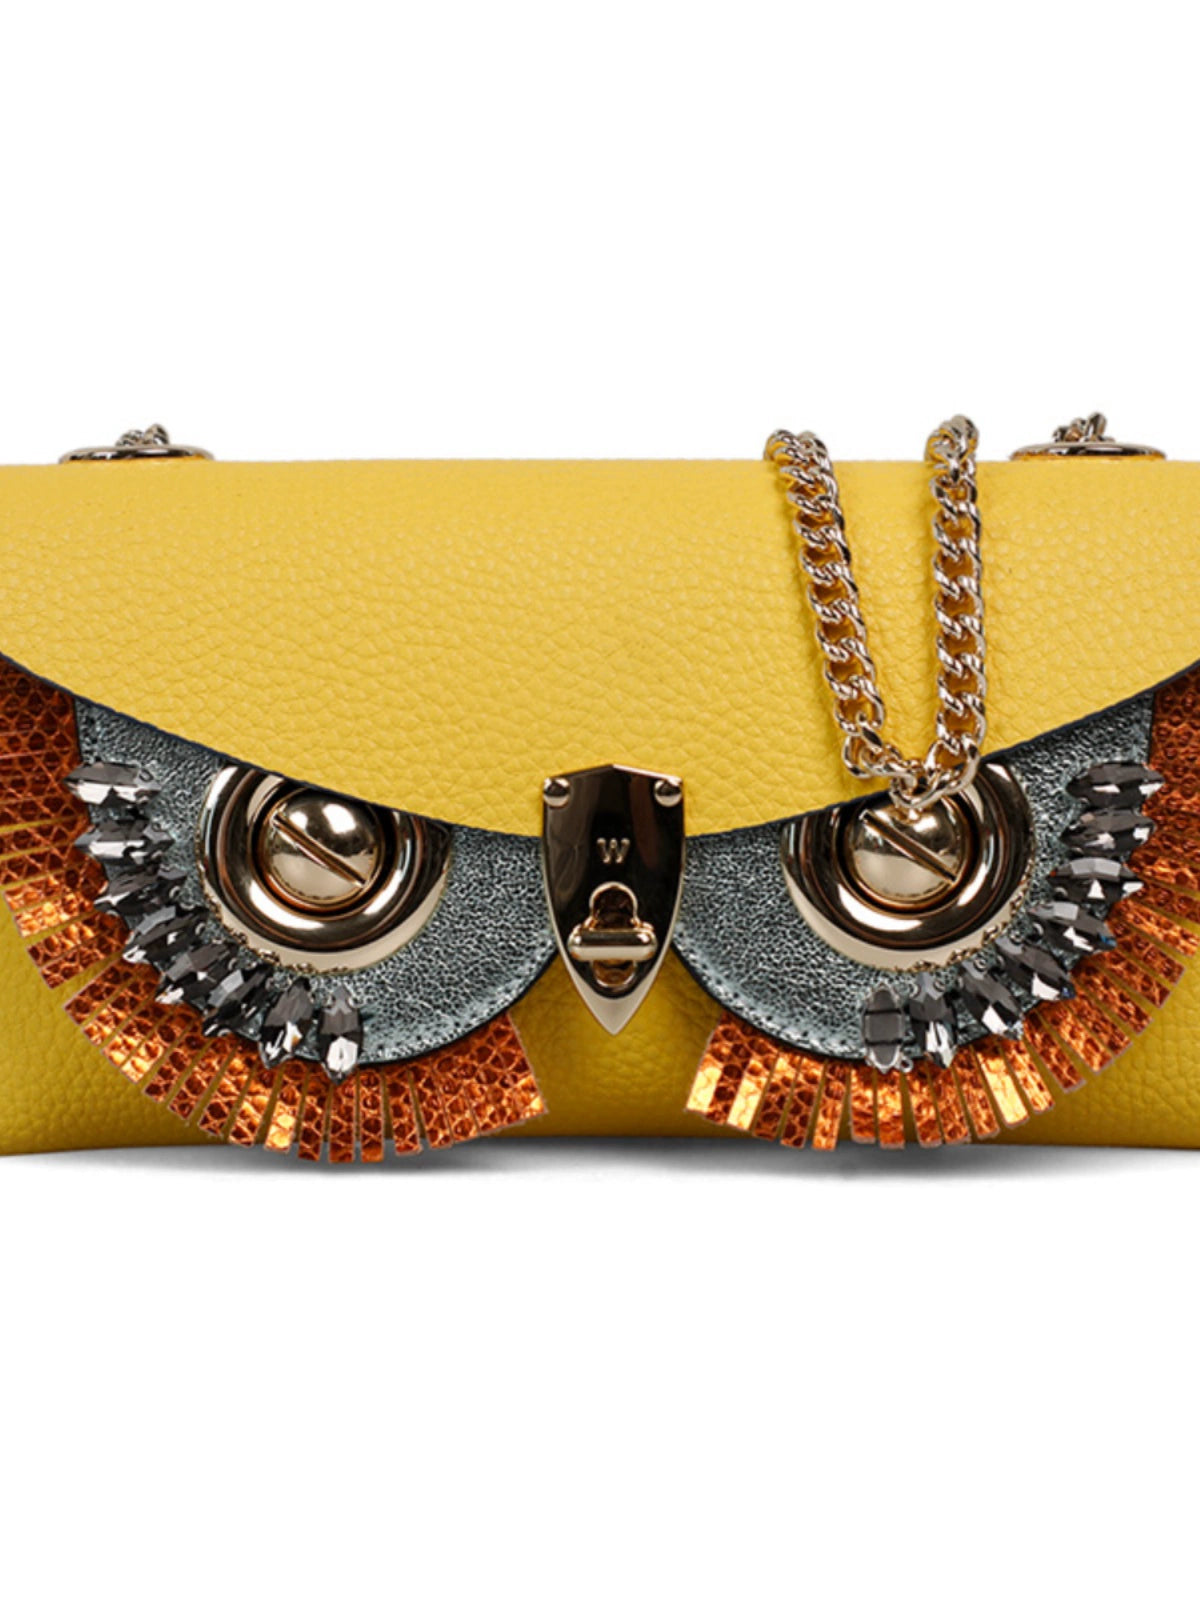 WANACCESSORY Black Yellow Double sided Owl Face Changing Oblique Cross Envelope Bag ALIAS Series